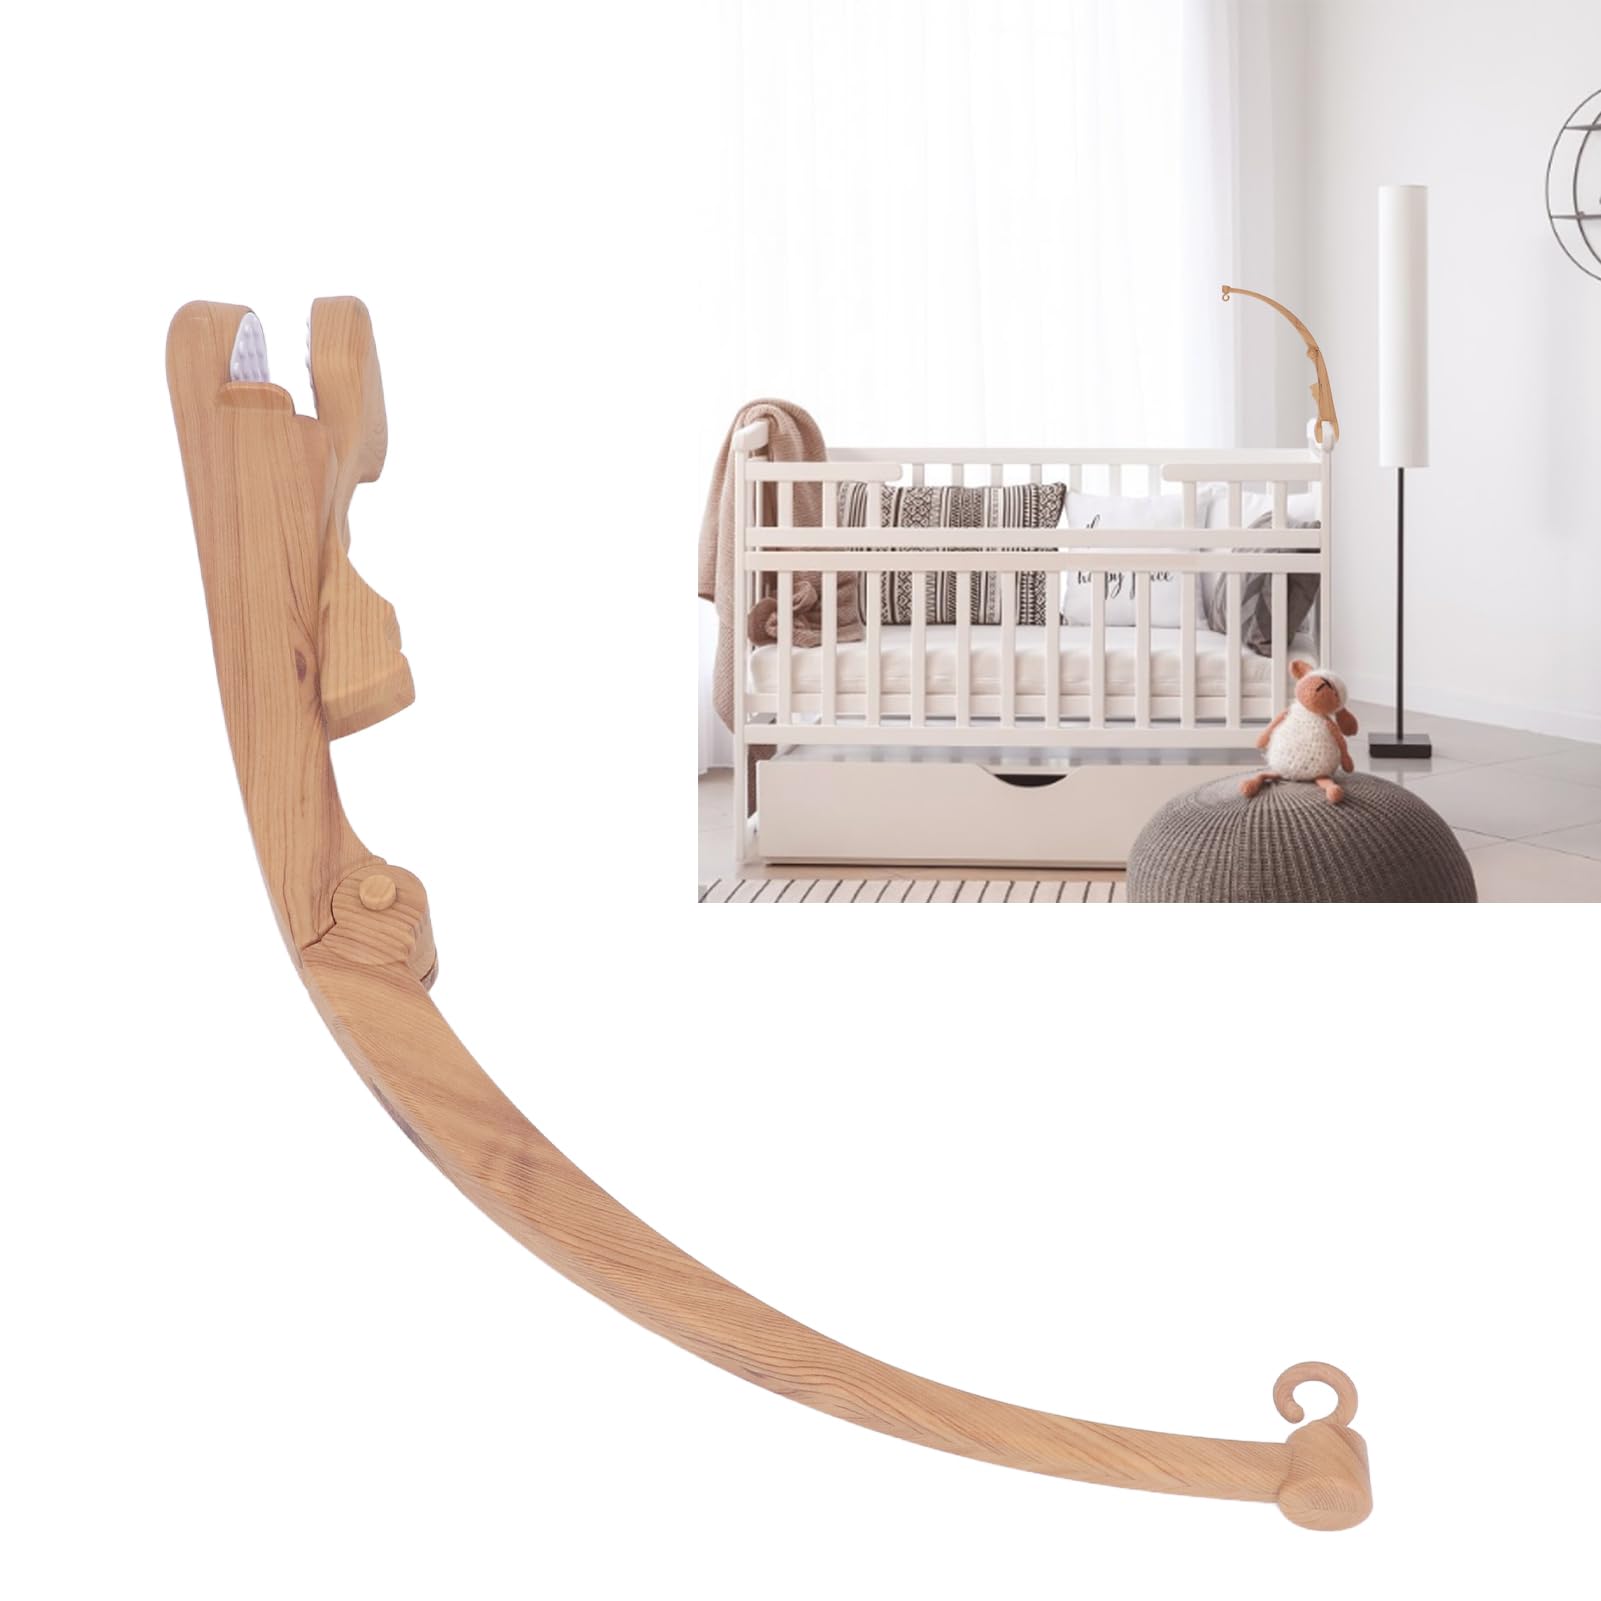 Crib Mobile Arm, Mobile Arm For Crib, Secure Wood Grain Faux Crib Furniture Support Mobile Holder For Crib Baby Crib Mobile Arm for Crib Toys Accessories